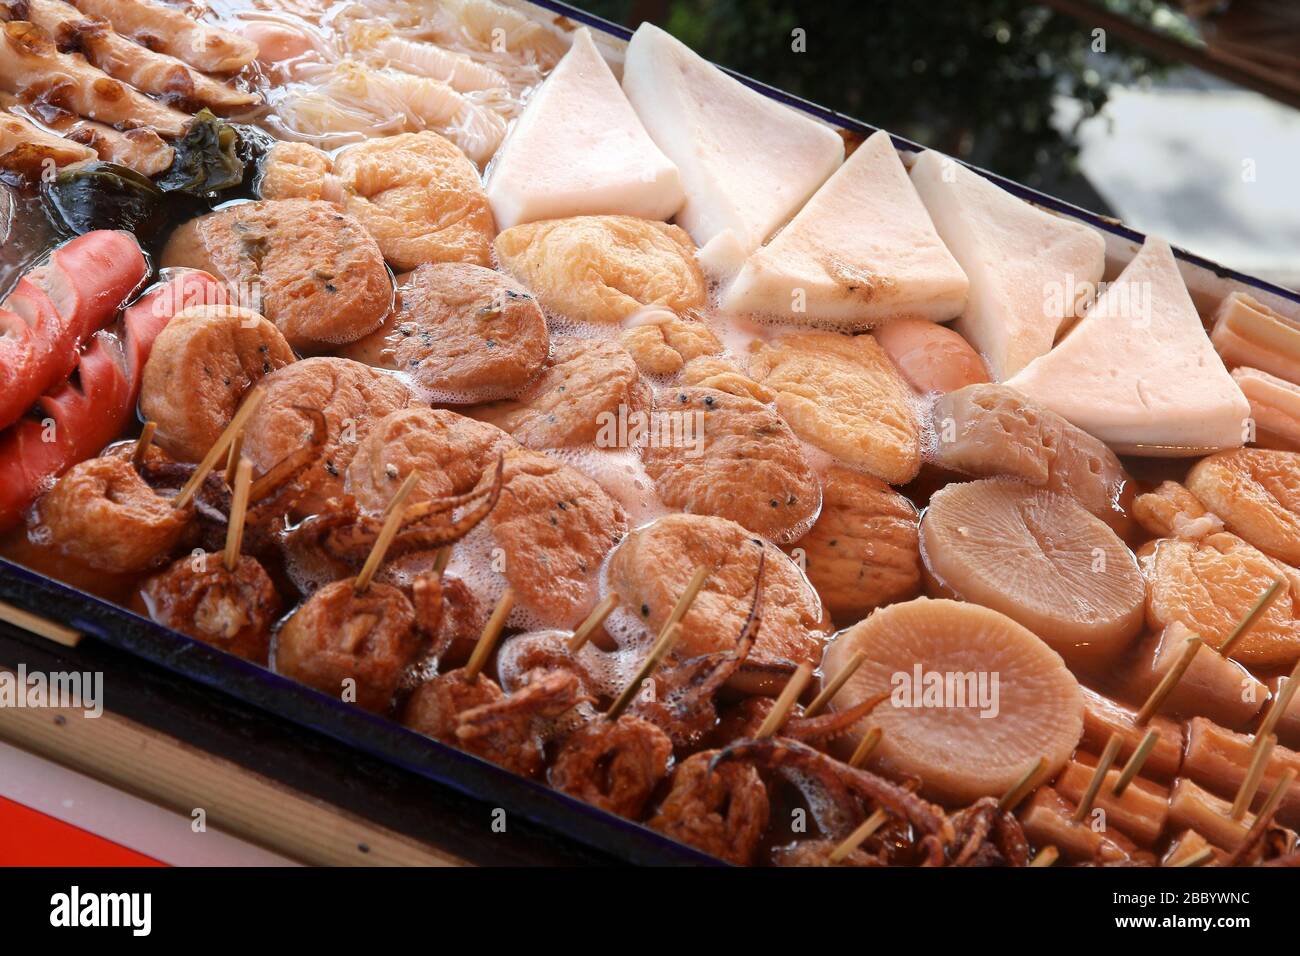 Tokyo street food. Japanese cuisine - oden food in soy broth. Typical  winter food in Japan with sausages, dumplings, tofu and daikon. Stock Photo